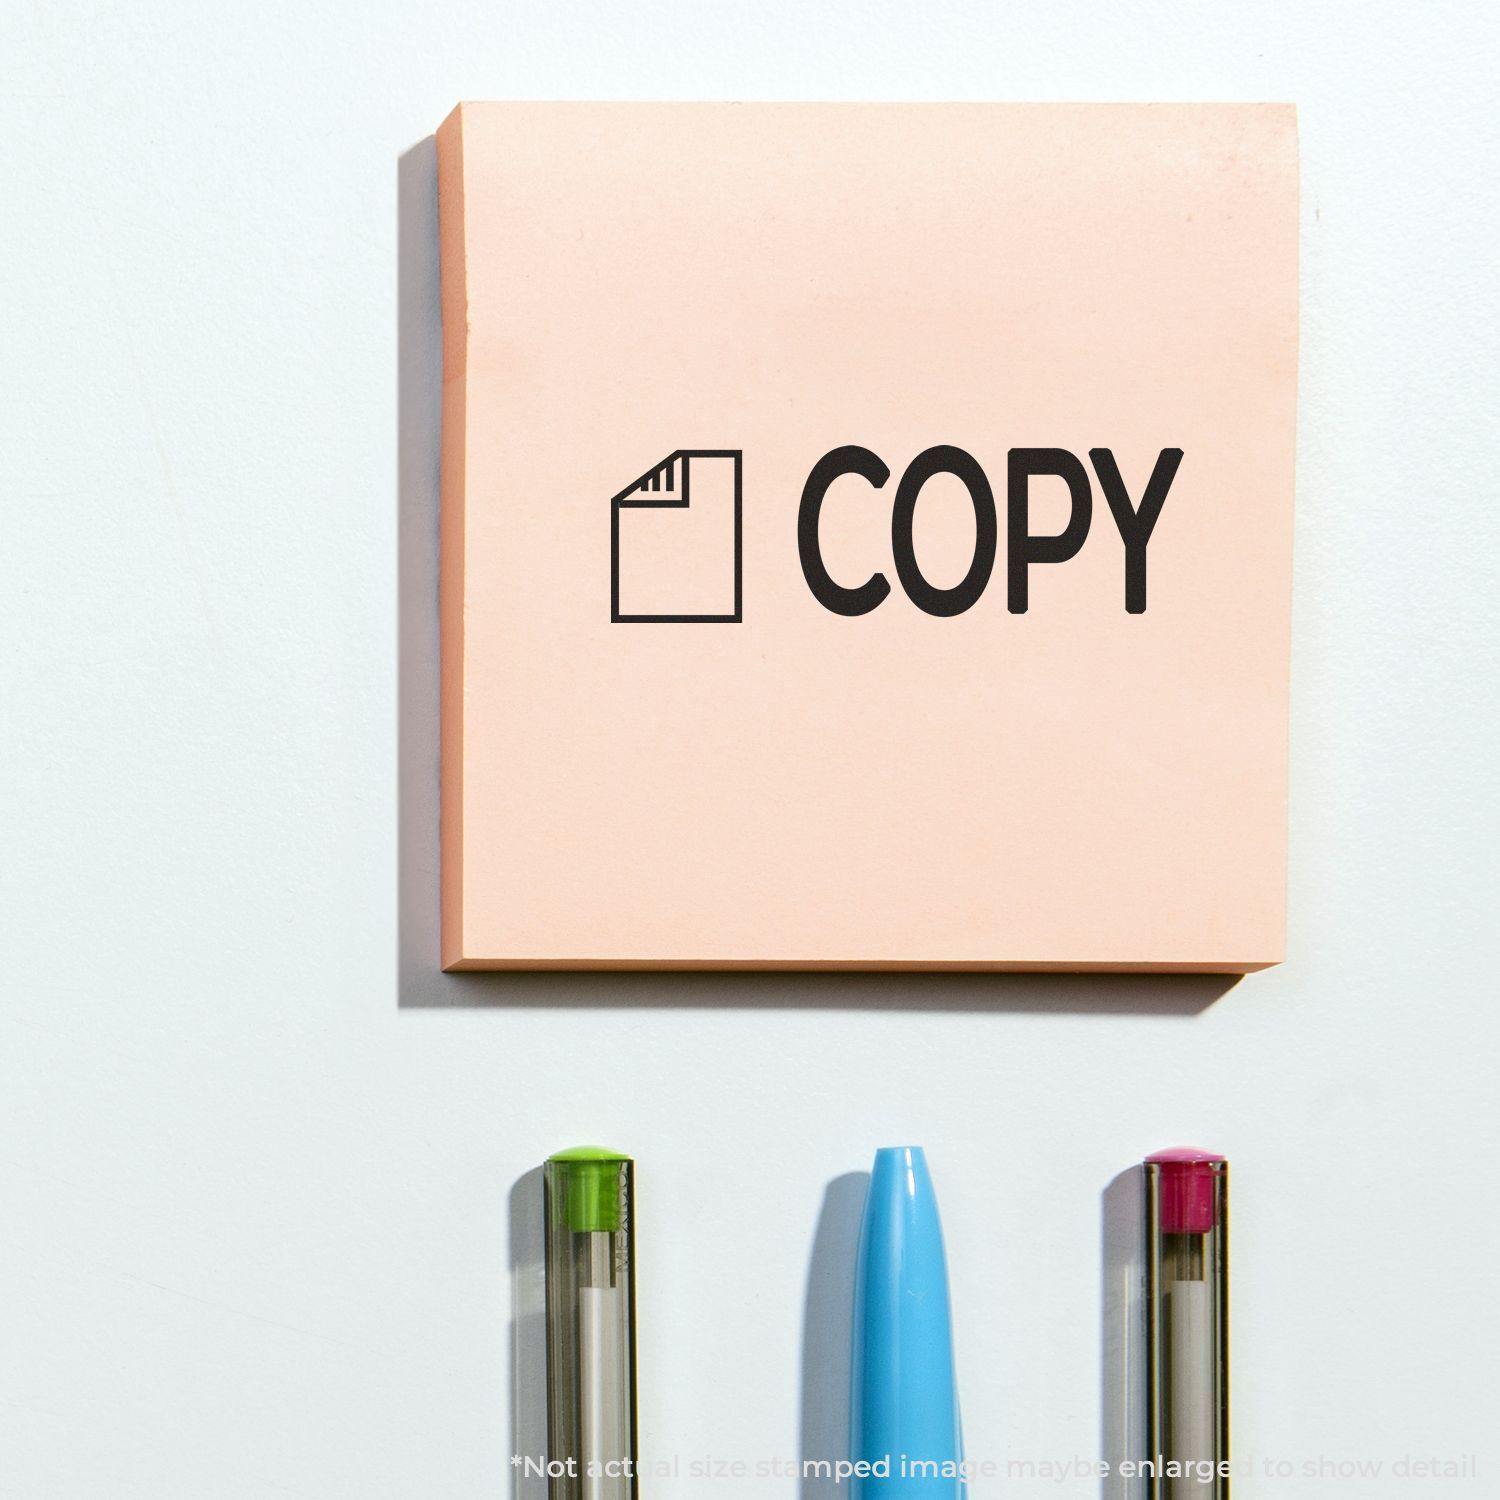 A self-inking stamp with a stamped image showing how the text "COPY" in bold font and a small image of a letter on the left is displayed after stamping.